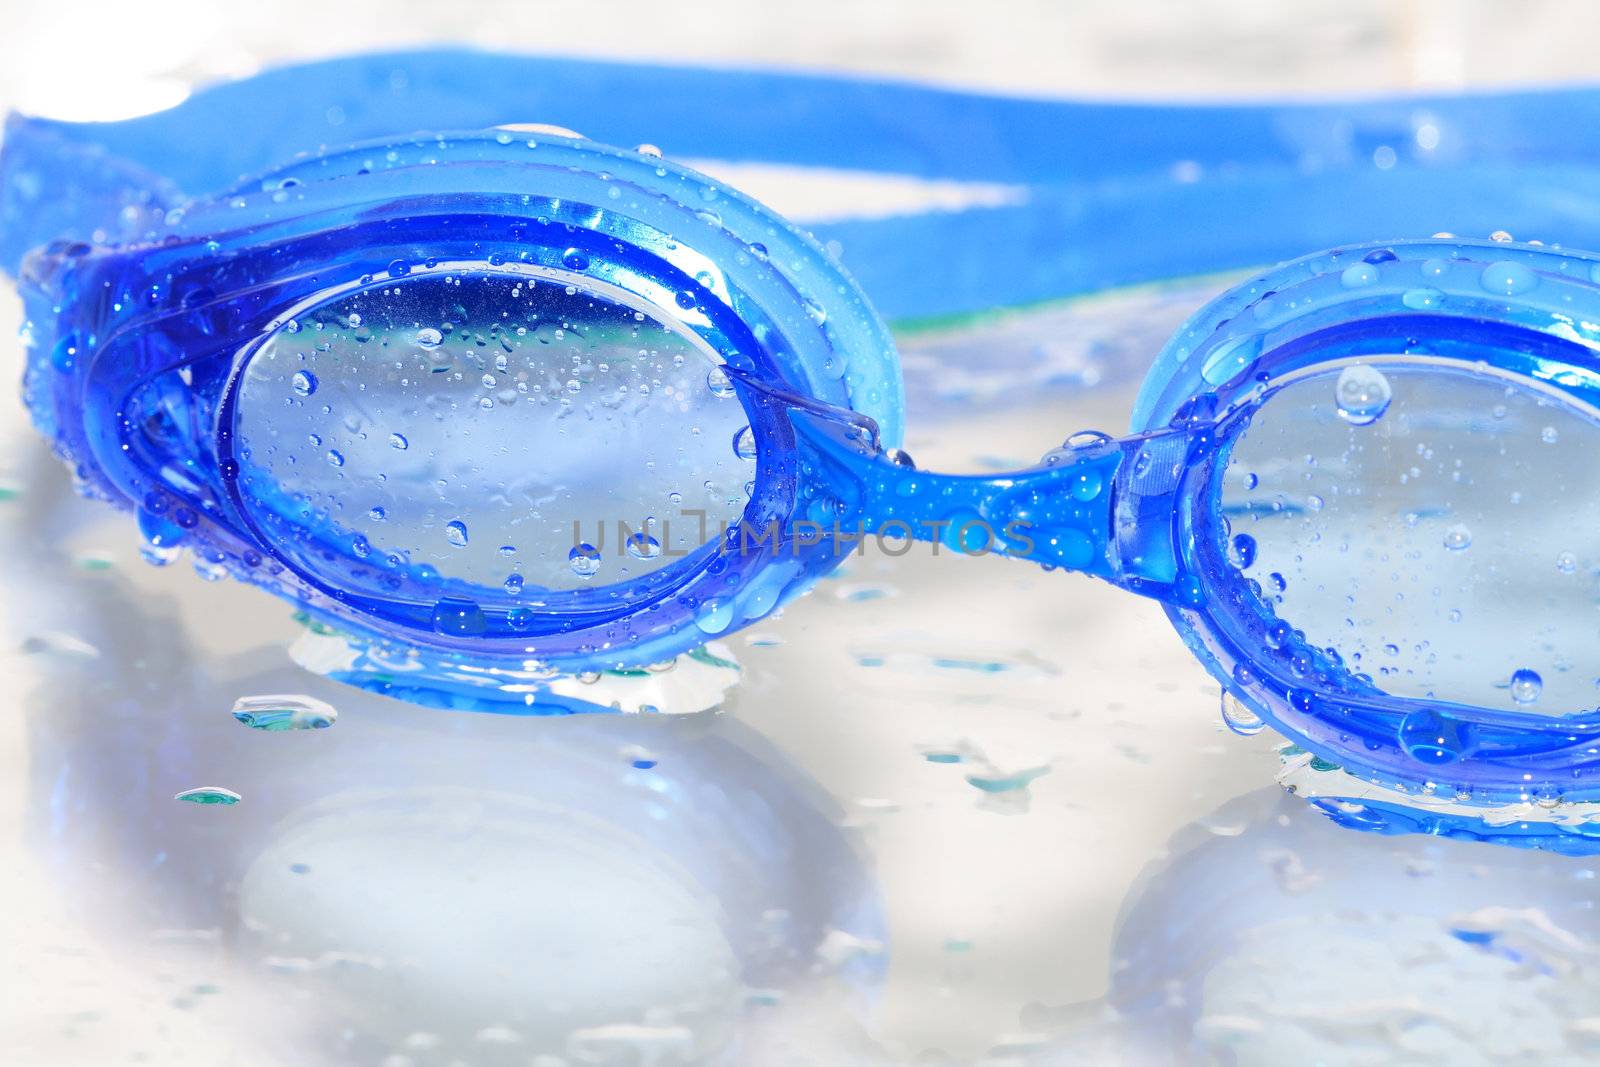 Closeup of blue wet swimming goggles on glass background with water drops